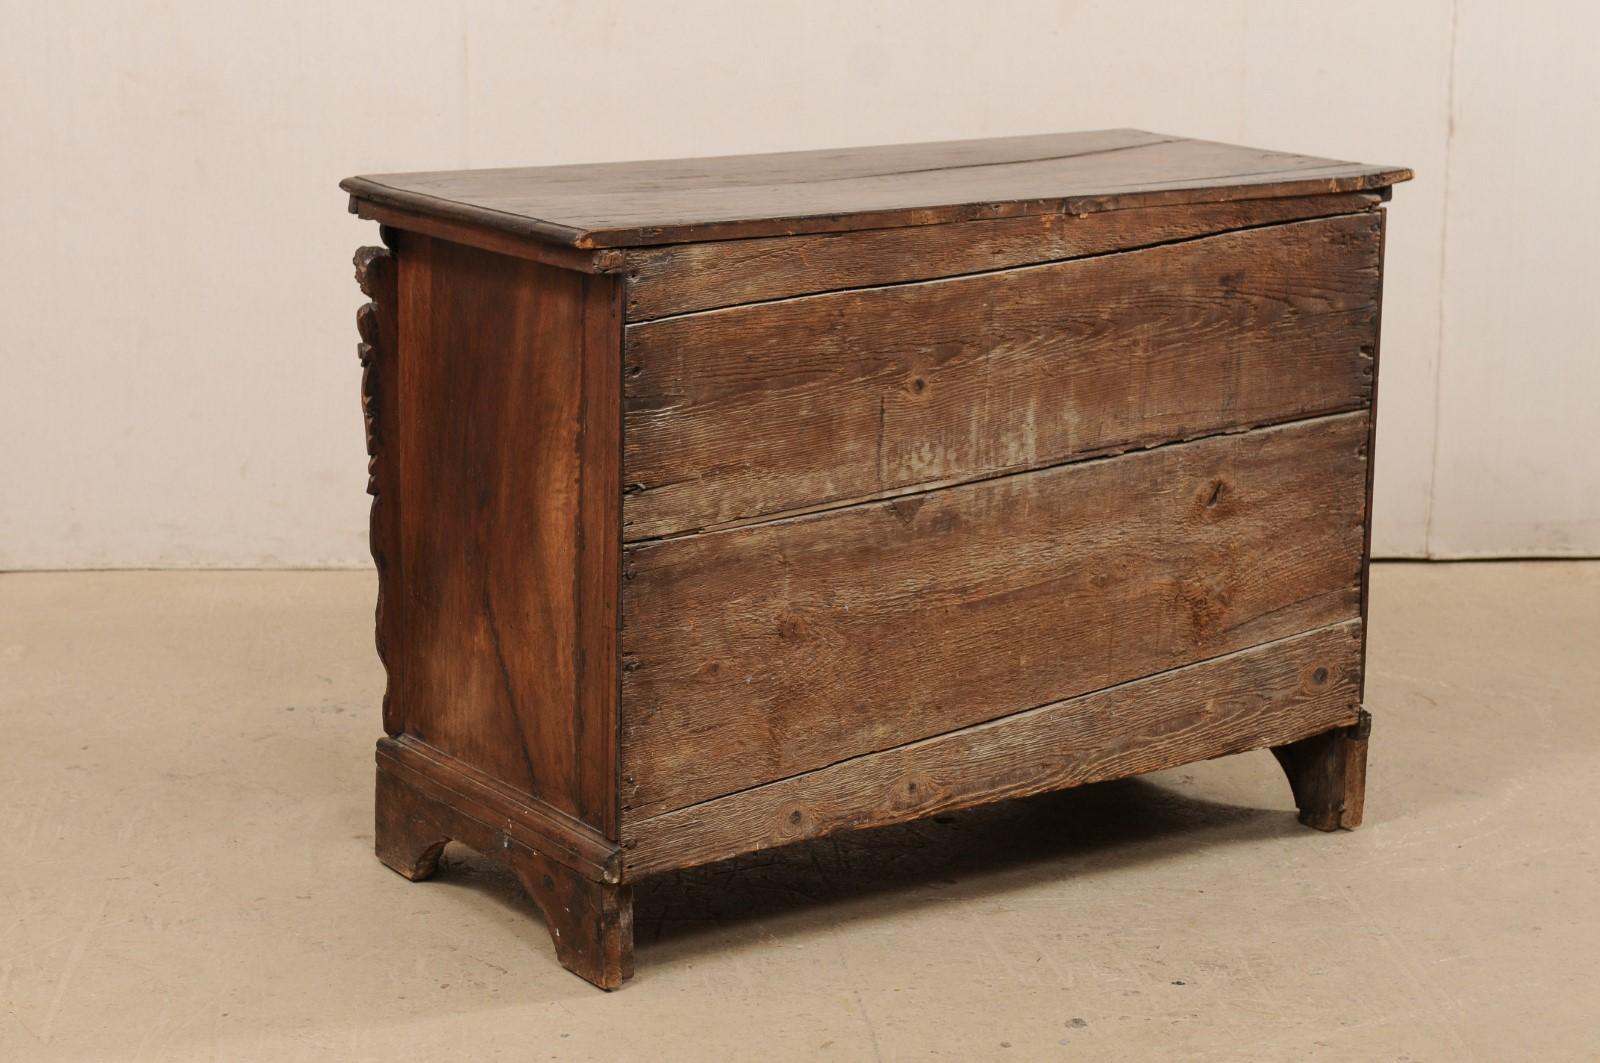 18th C Italian Chest Adorn with Putti, Egg-n-Dart, and Acanthus Carvings For Sale 3